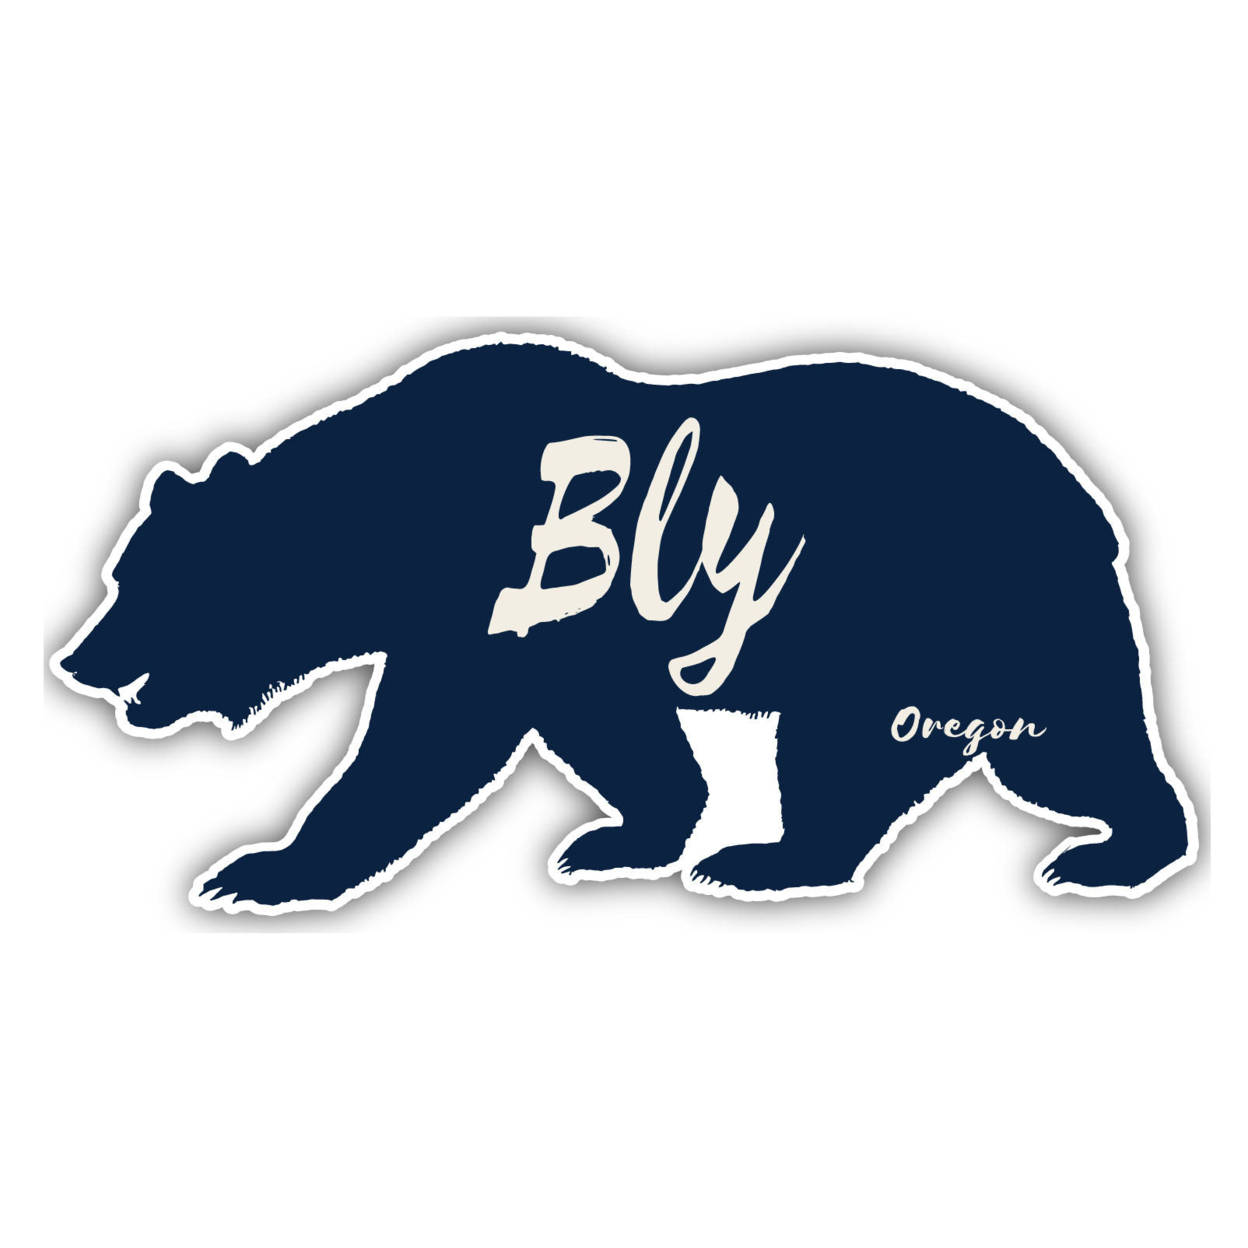 Bly Oregon Souvenir Decorative Stickers (Choose Theme And Size) - 4-Pack, 12-Inch, Bear